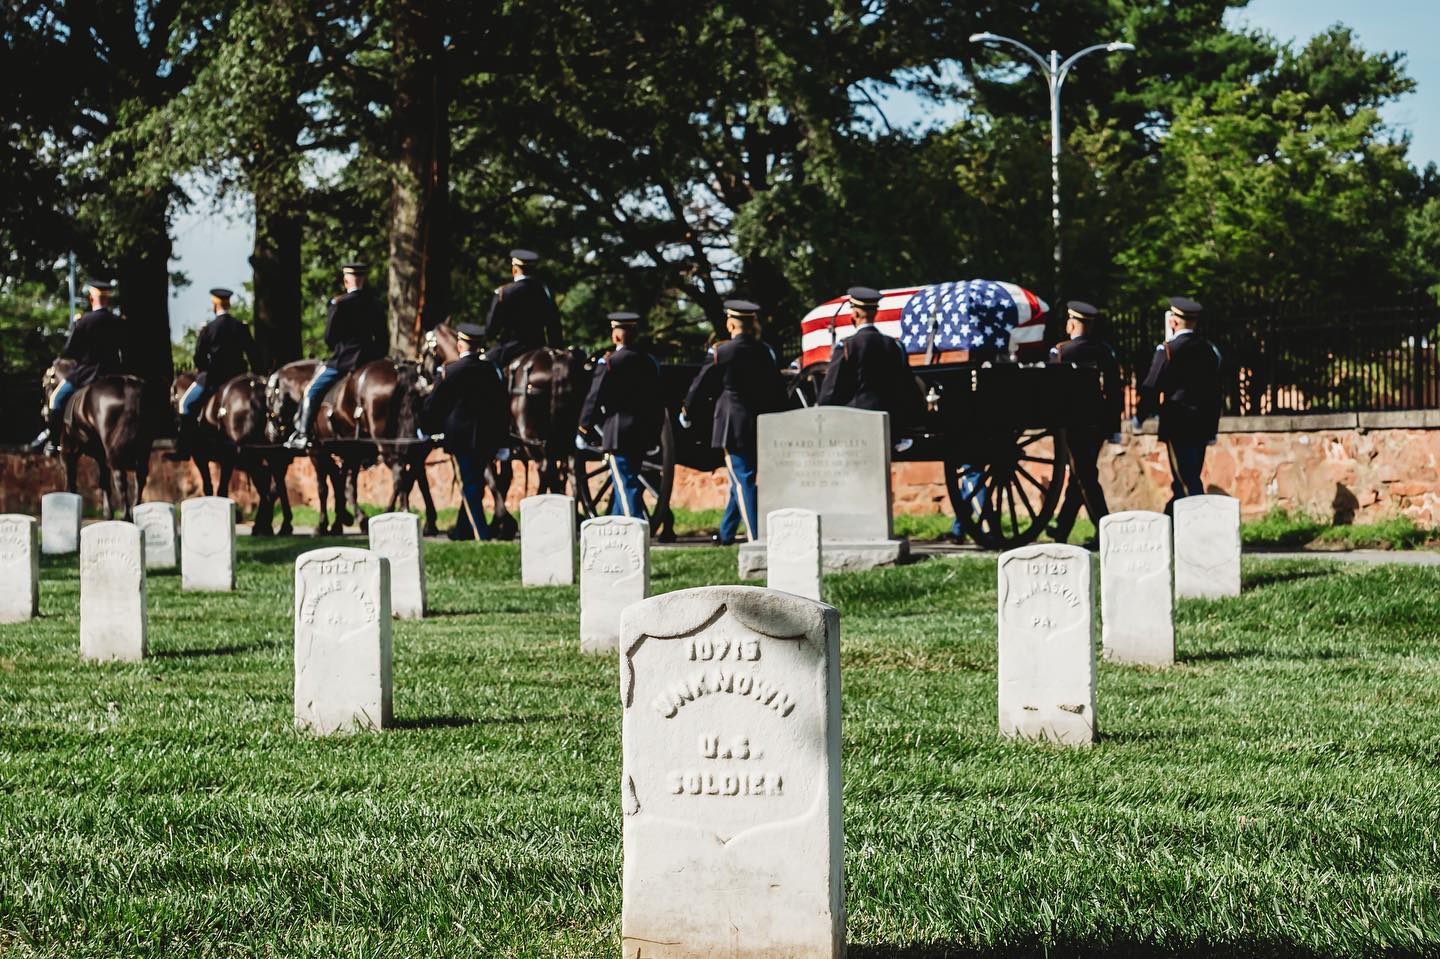 The caisson platoon and members of the 3rd U.S. Infantry Regiment (The Old Guard) render final honors for Pfc. Karl Dye who was reported missing in action in South Korea on July 16, 1950. Dye was killed during the Korean War and was accounted for on December 3, 2018. ⠀
⠀
Members of The Old Guard take on the solemn duty and distinct privilege of rendering final honors for Service Members as they are laid to rest in Arlington National Cemetery. ⠀
⠀
We share this same respect for the fallen in our work each and every day here in Arlington.